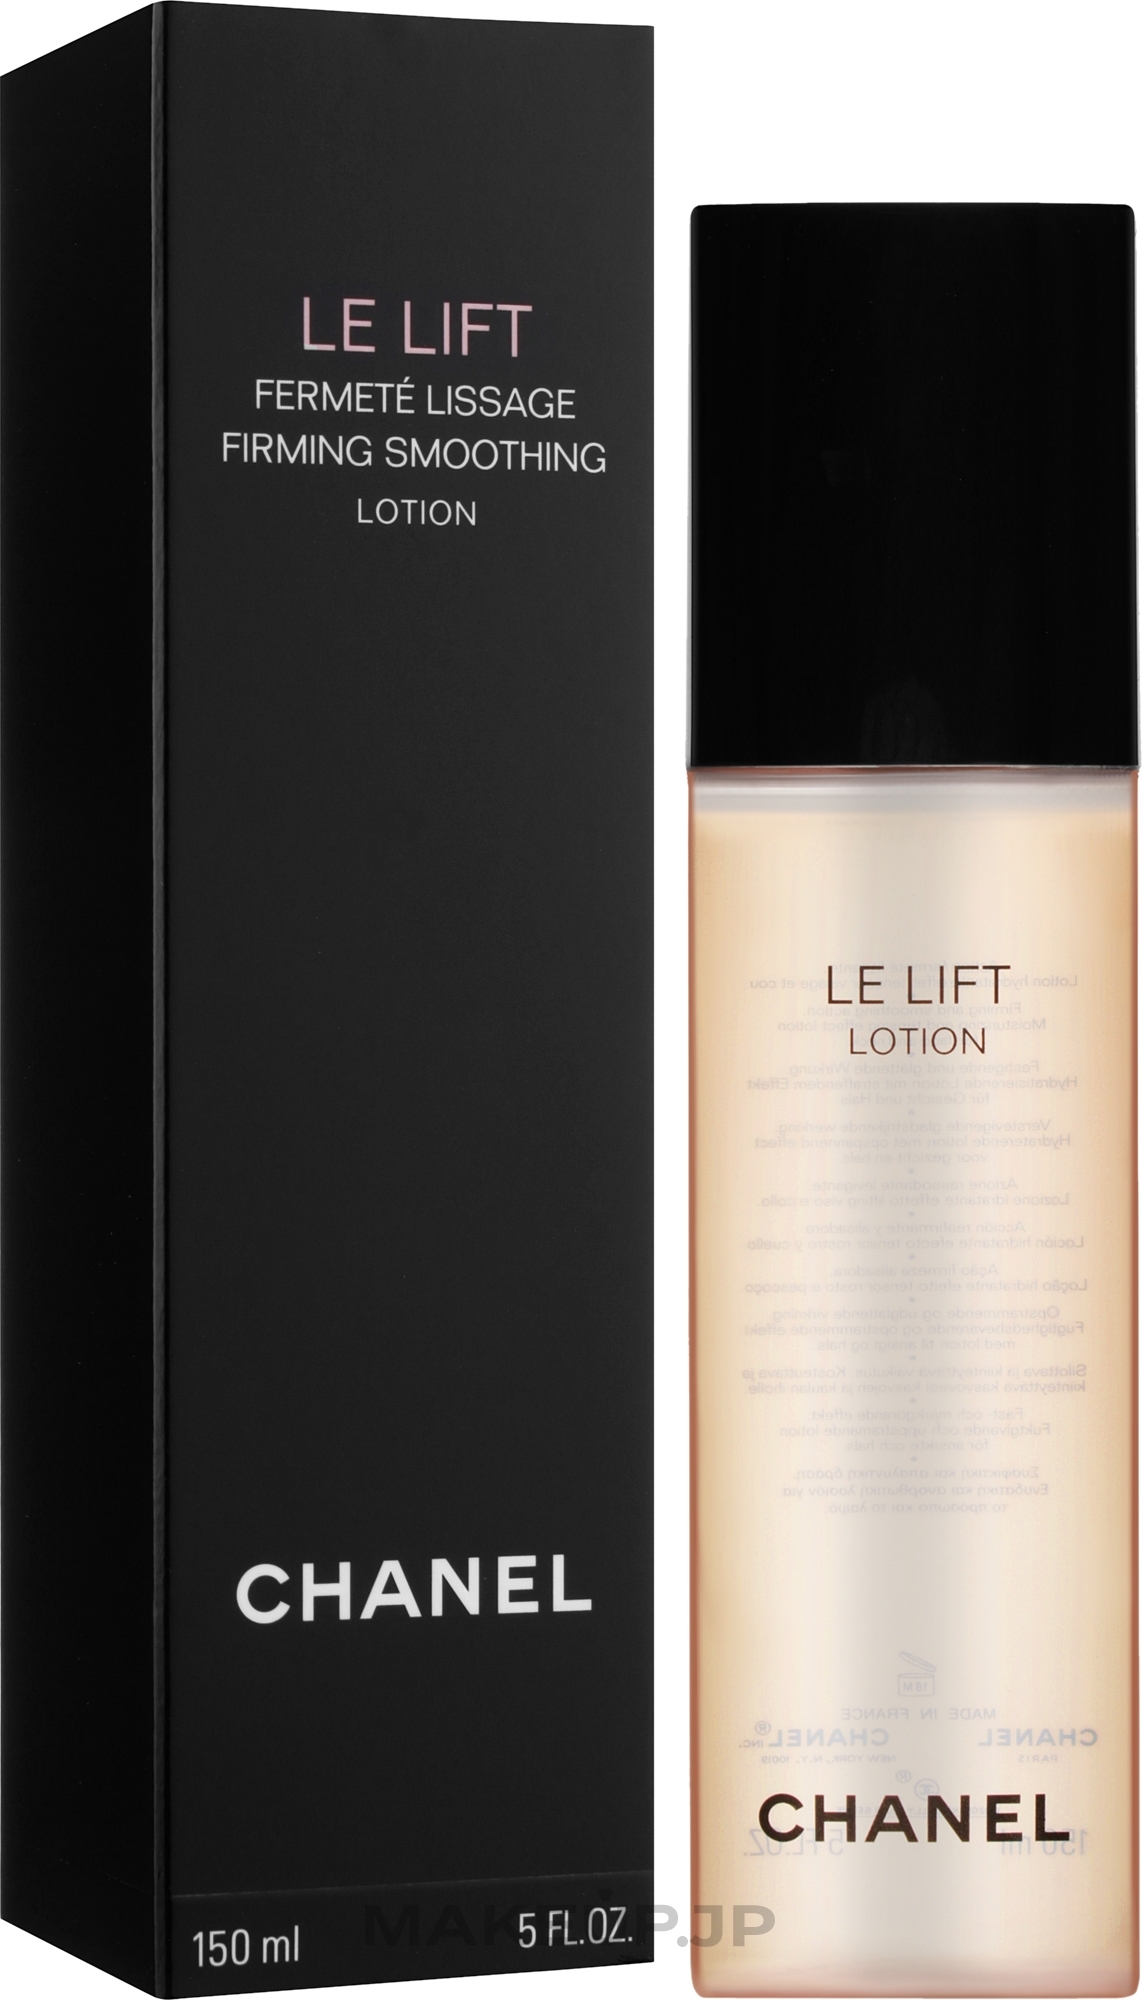 Firming Soothing Lotion - Chanel Le Lift Firming Soothing Lotion — photo 150 ml